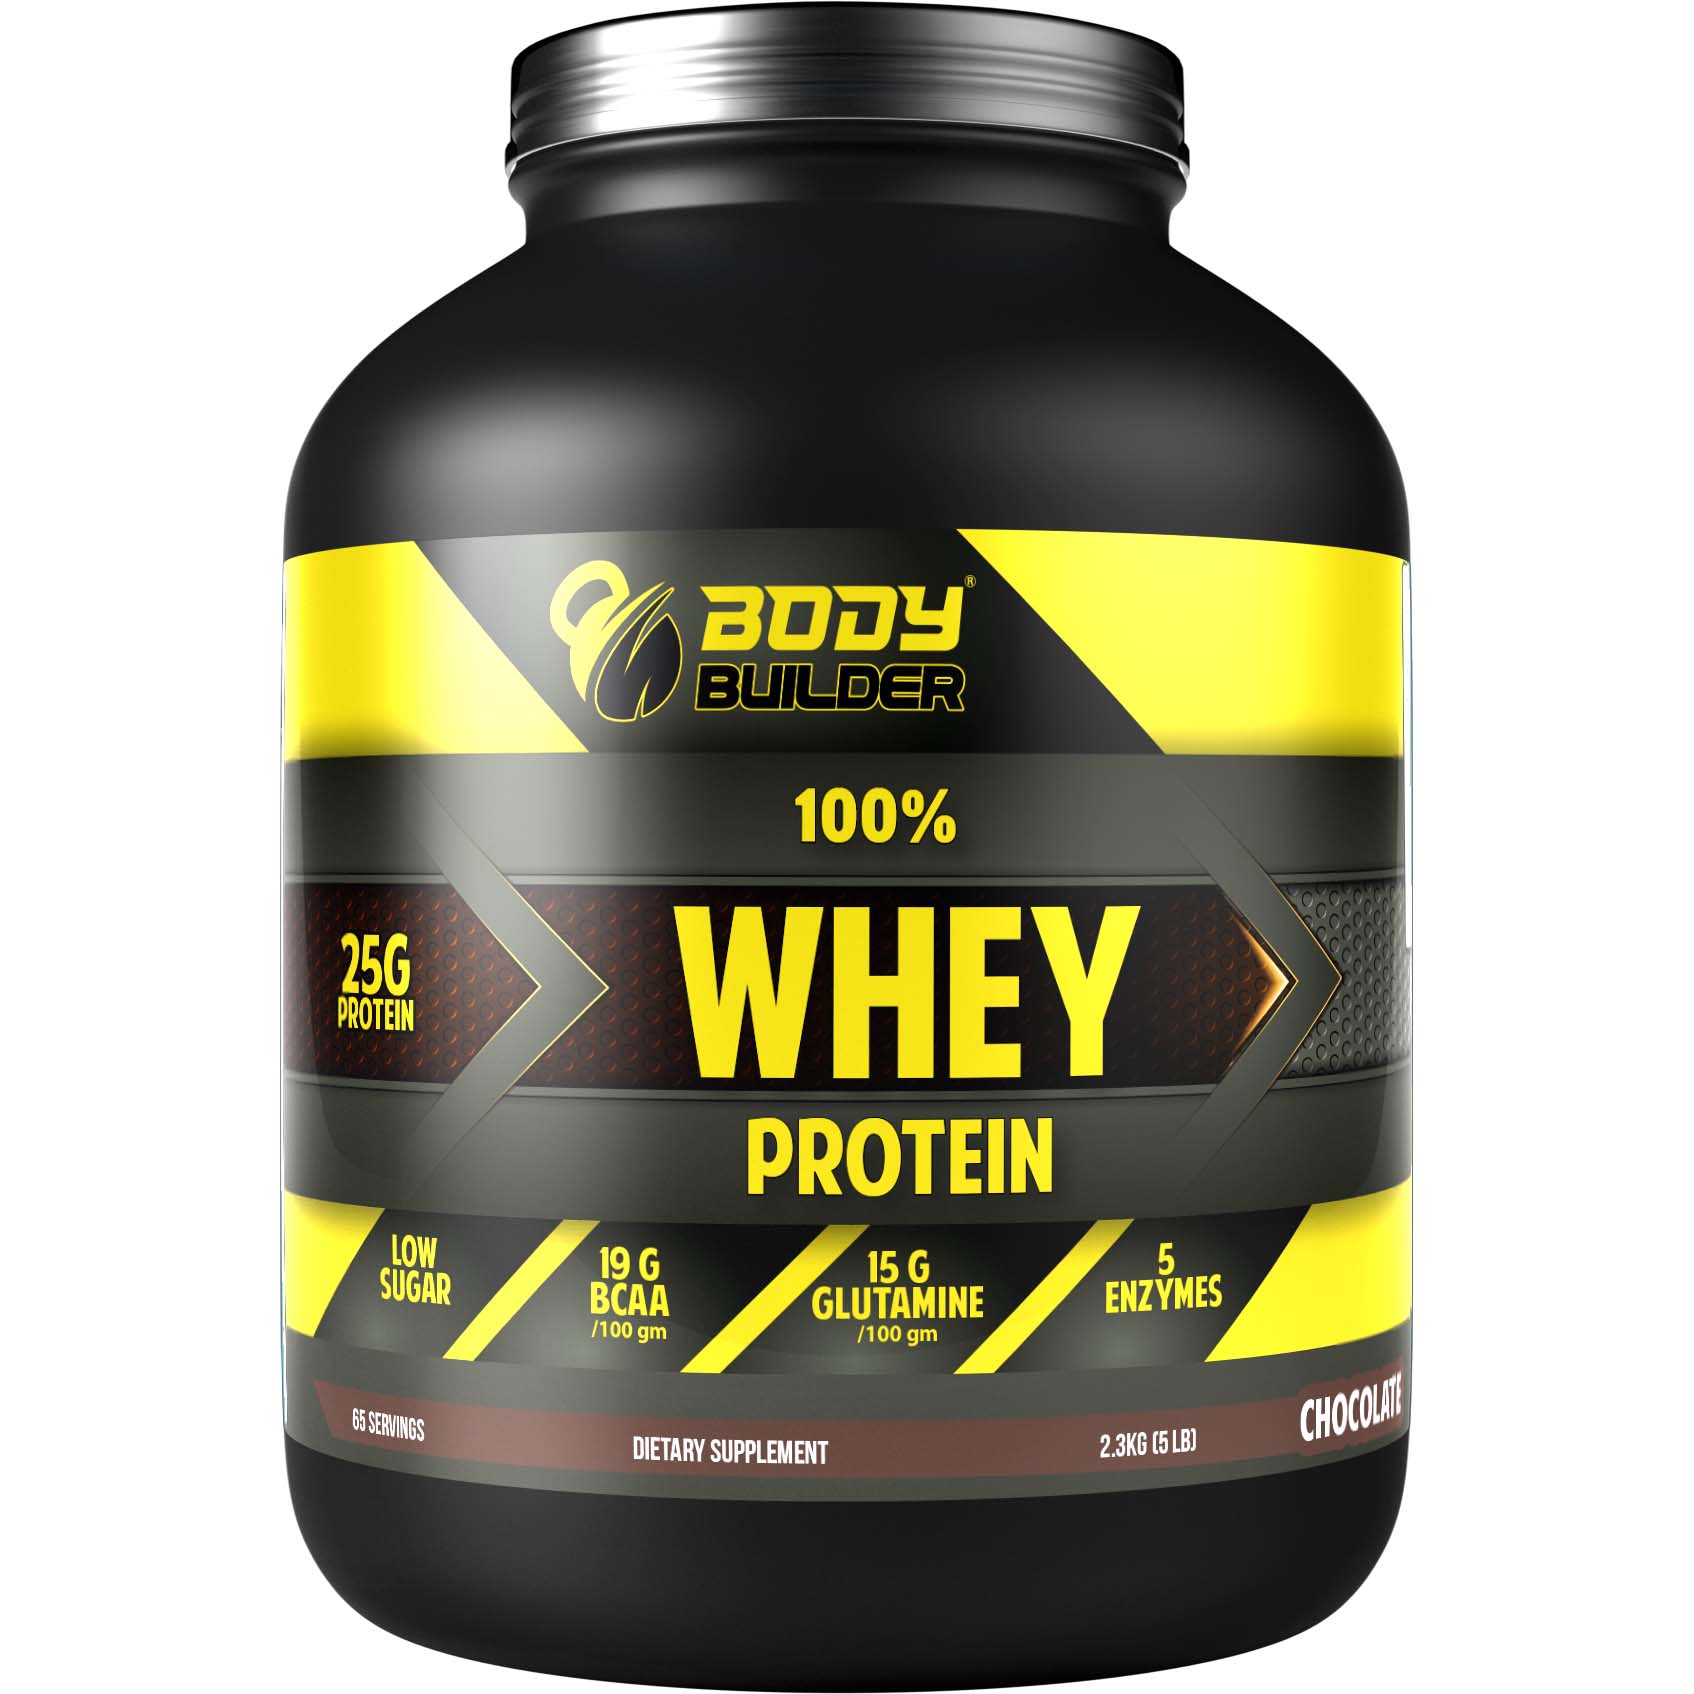 Body Builder 100% Whey Protein, Chocolate, 5 LB